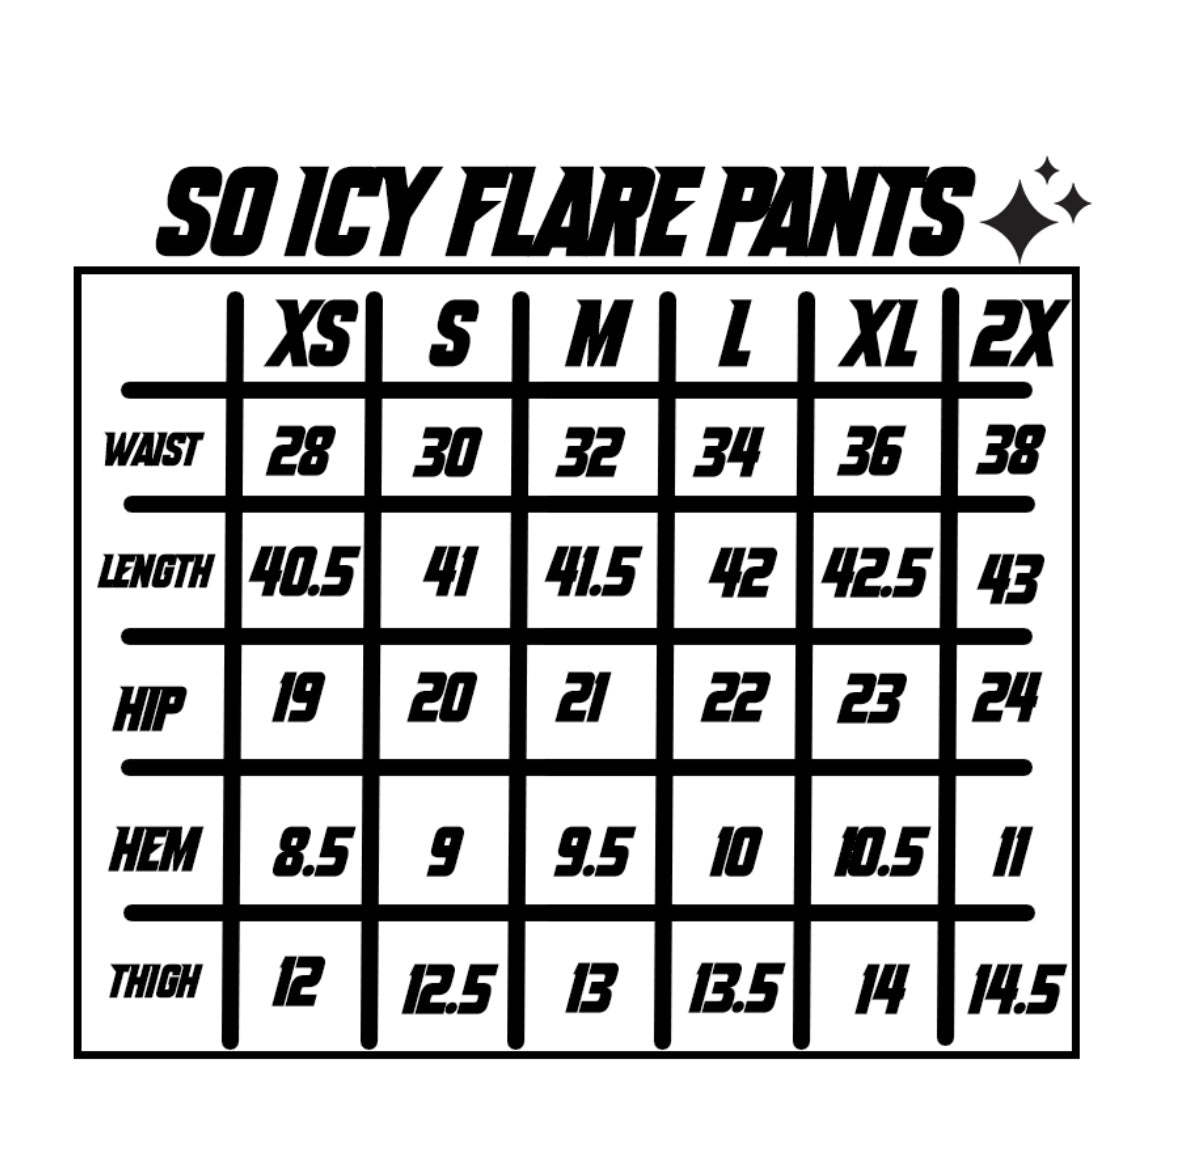 SO ICY FLARE PANTS